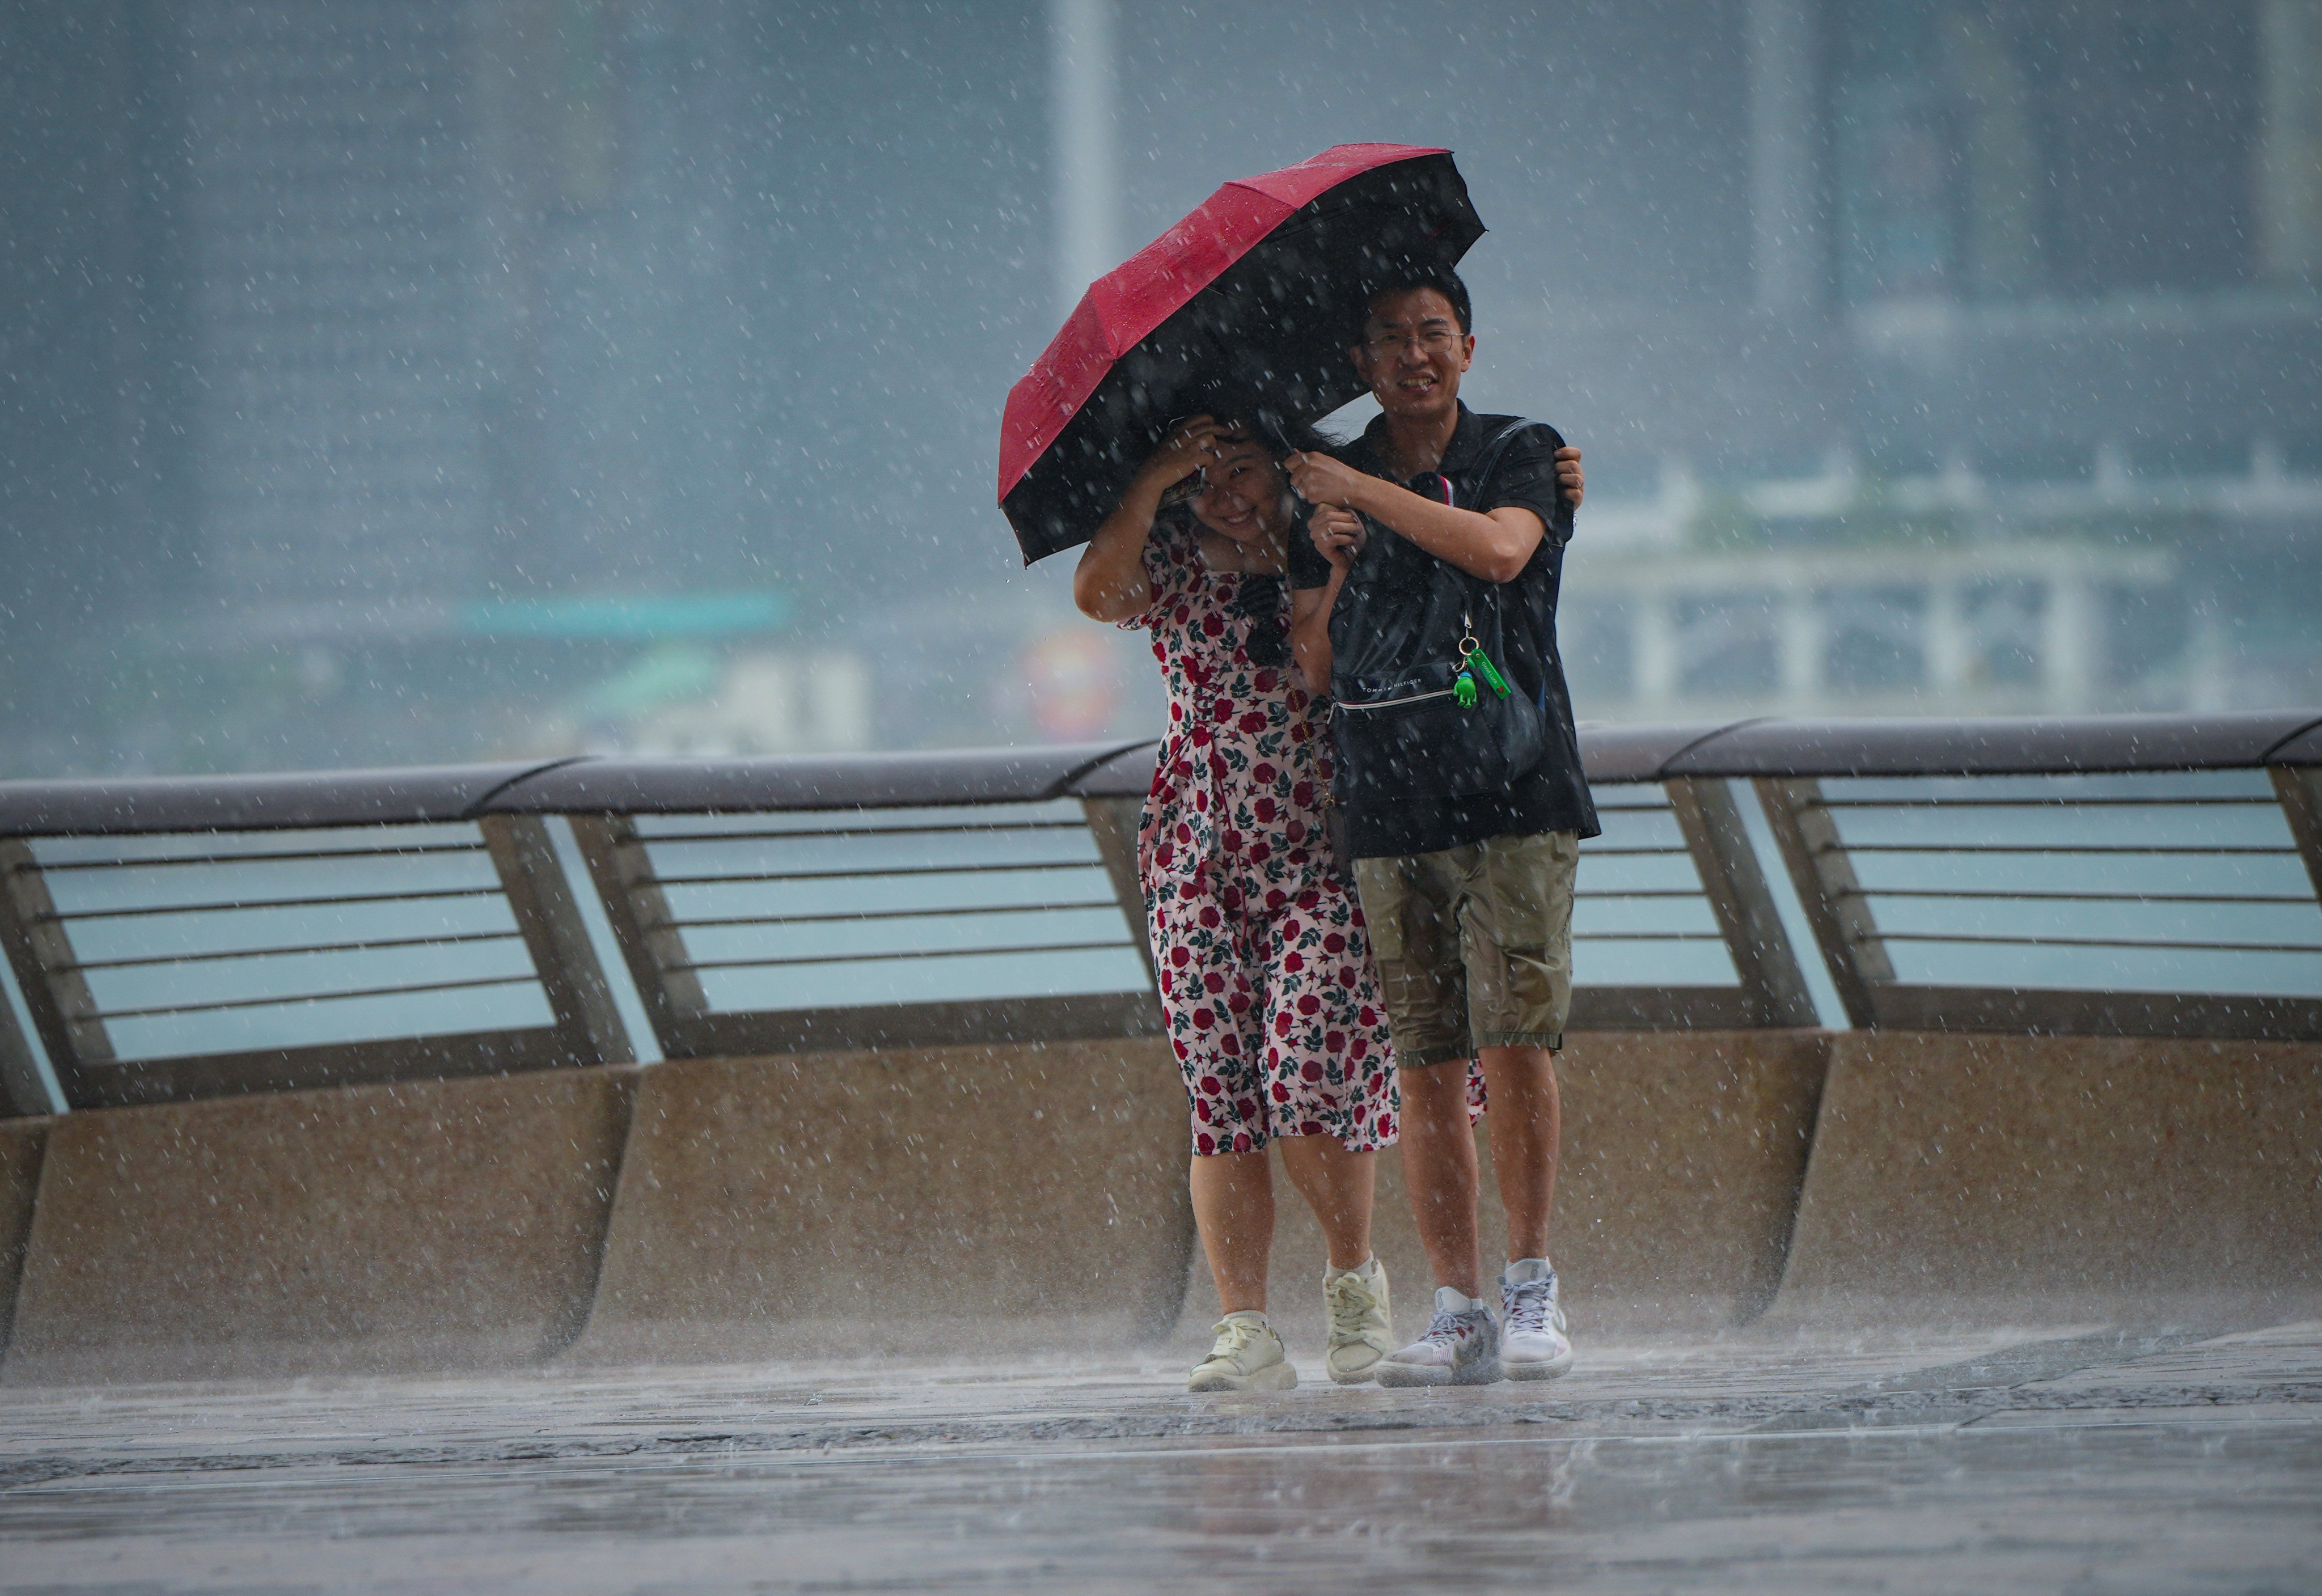 Residents have been told to brace for the change in weather. Photo: Sam Tsang